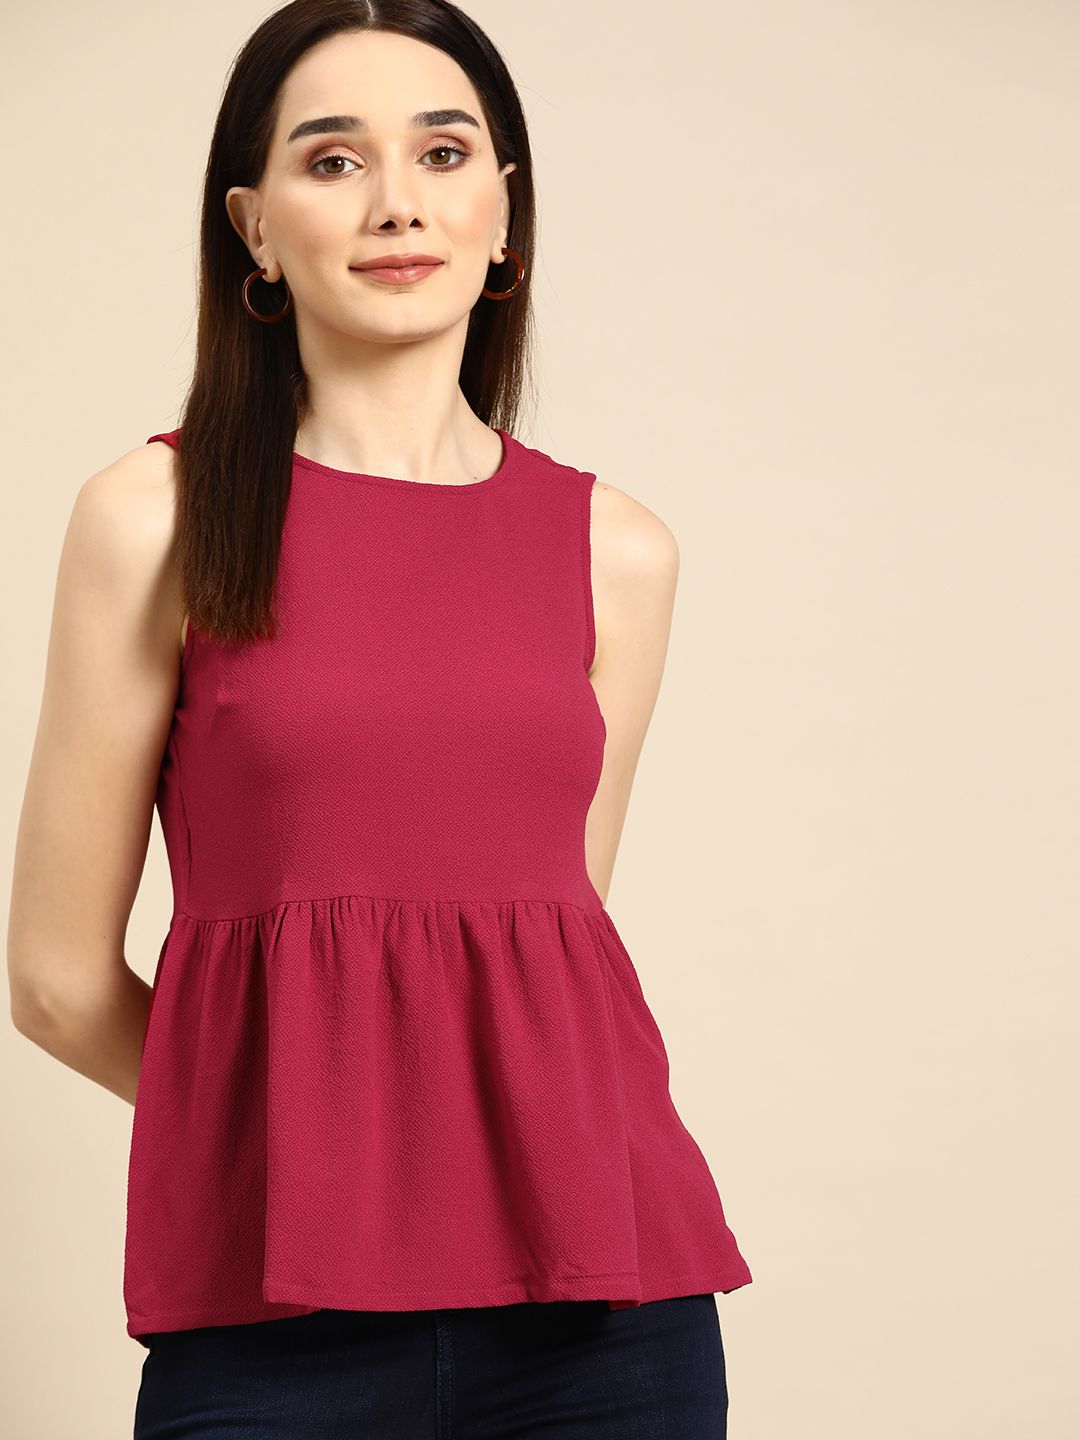 all about you Dark Pink Sleeveless Peplum Top Price in India